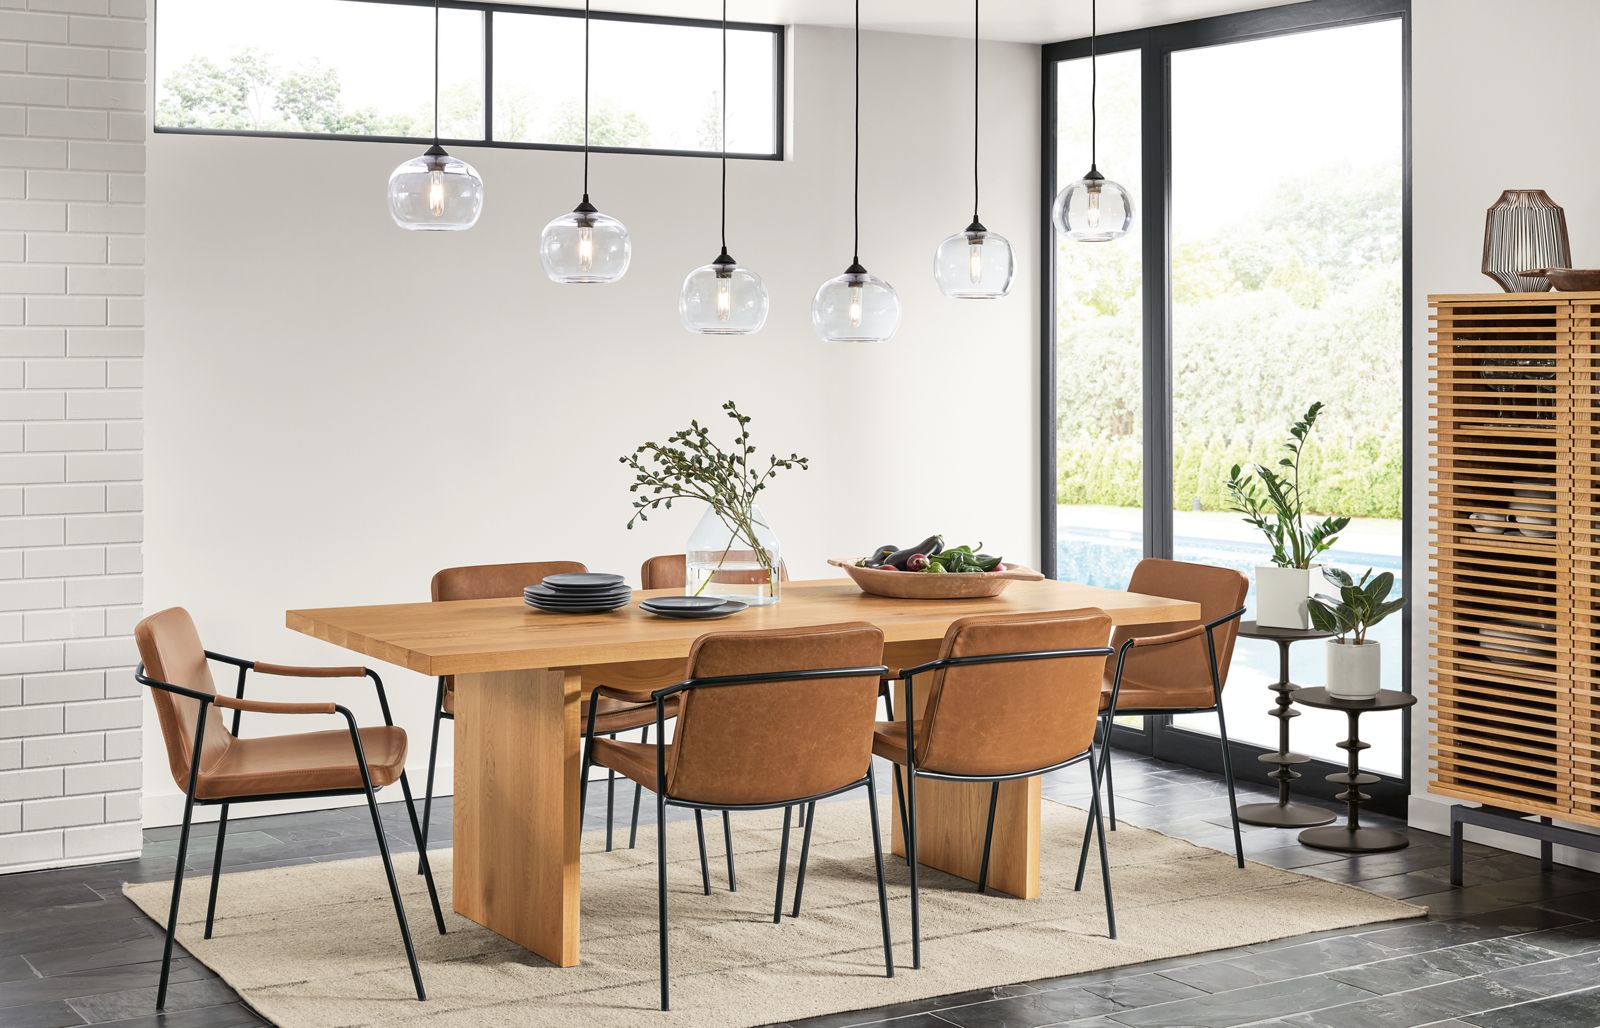 Detail of Corbett dining table in white oak in large dining room with leather chairs.